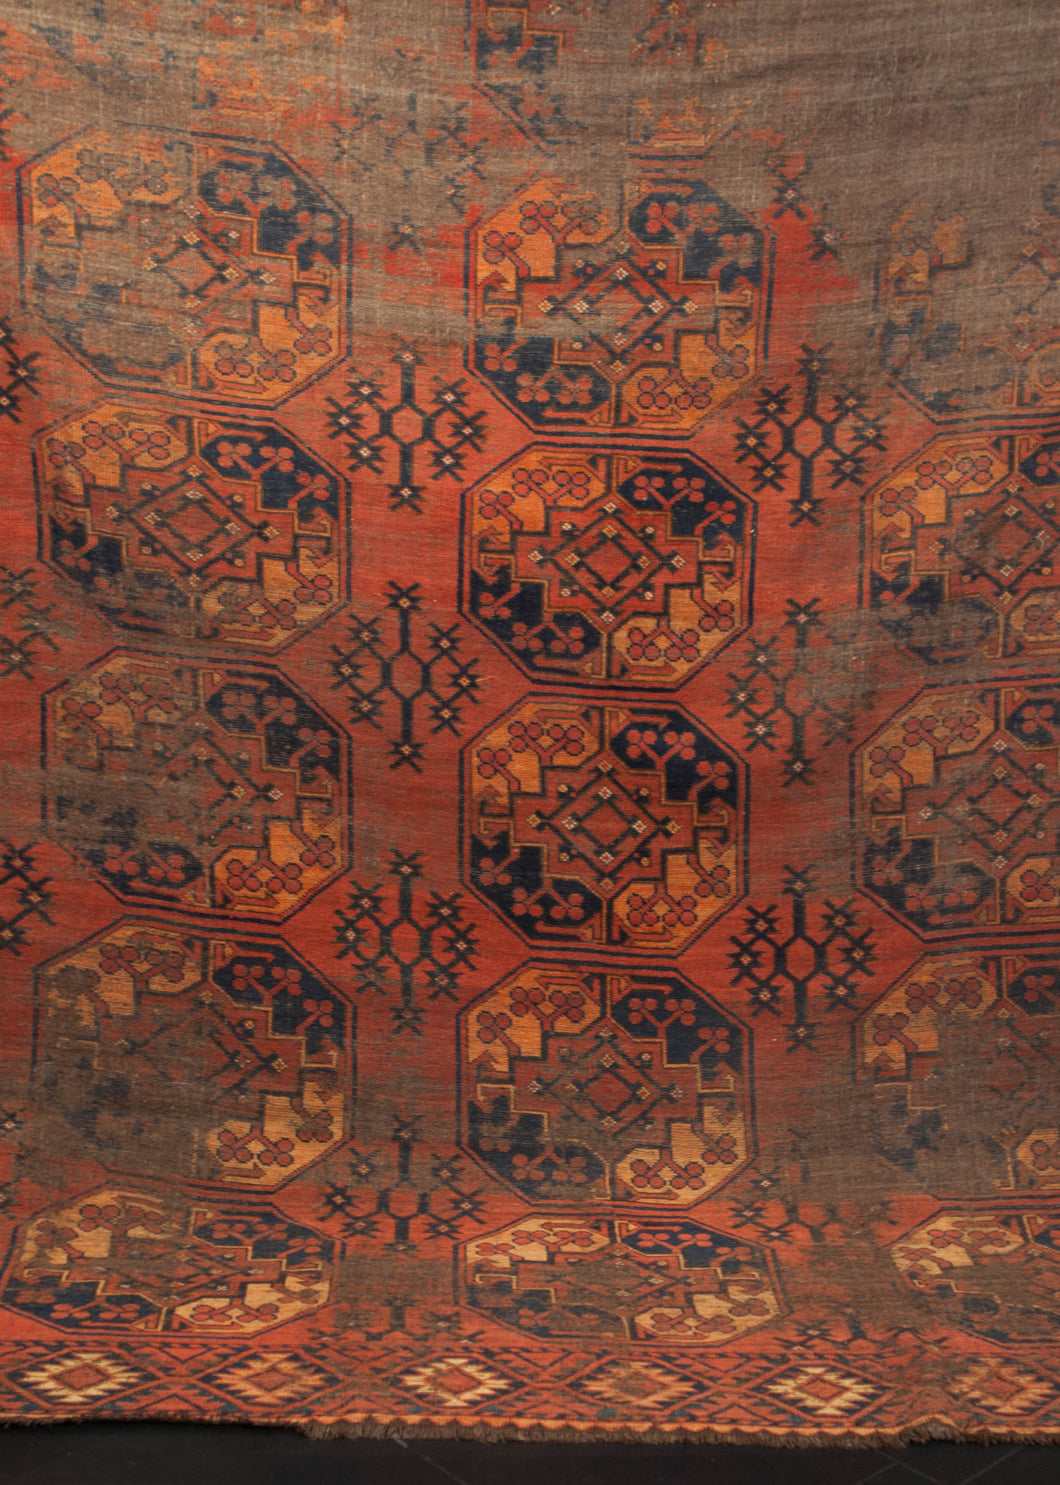 Turkmen rug dating from the 19th century. Earth color palette of brown, red, orange and navy with a repeating gul design. 